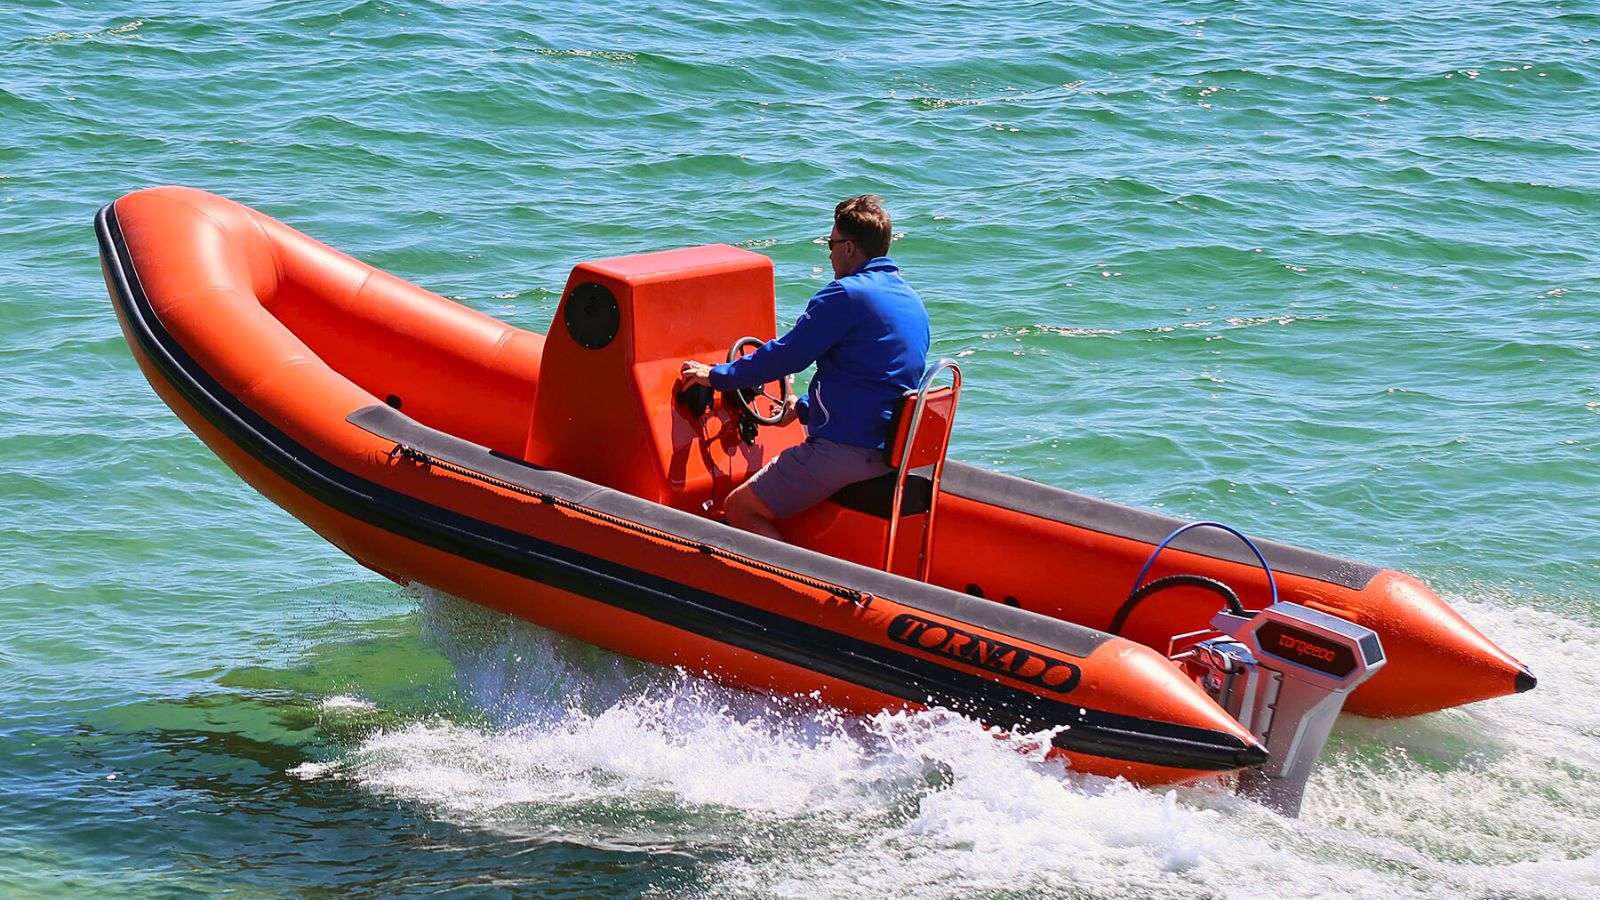 Tornado-5.4m-electric-boat-with-12kW-motor